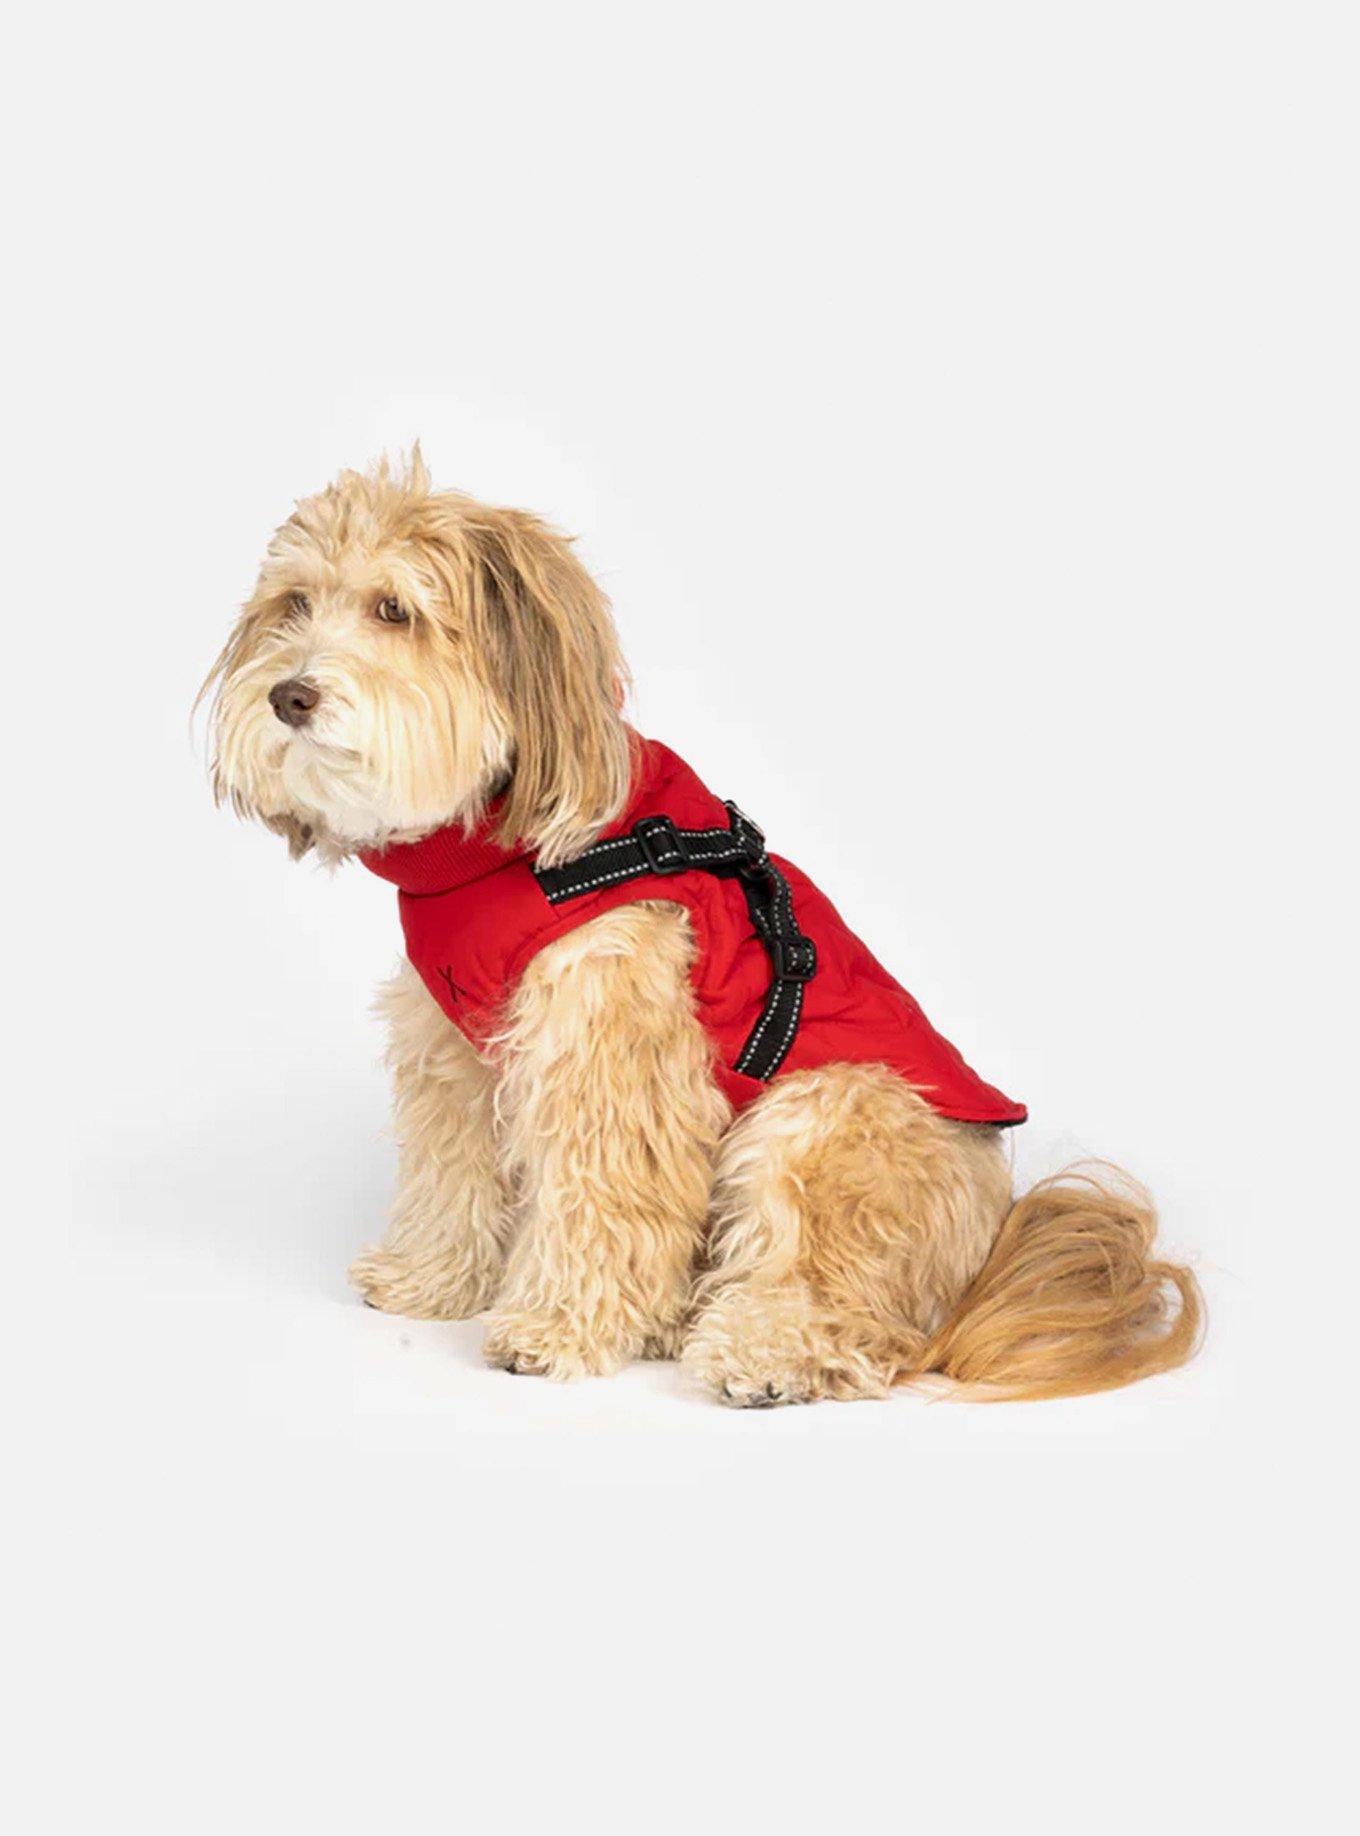 Quilted Dog Jacket With Built-In Harness Red, RED, alternate